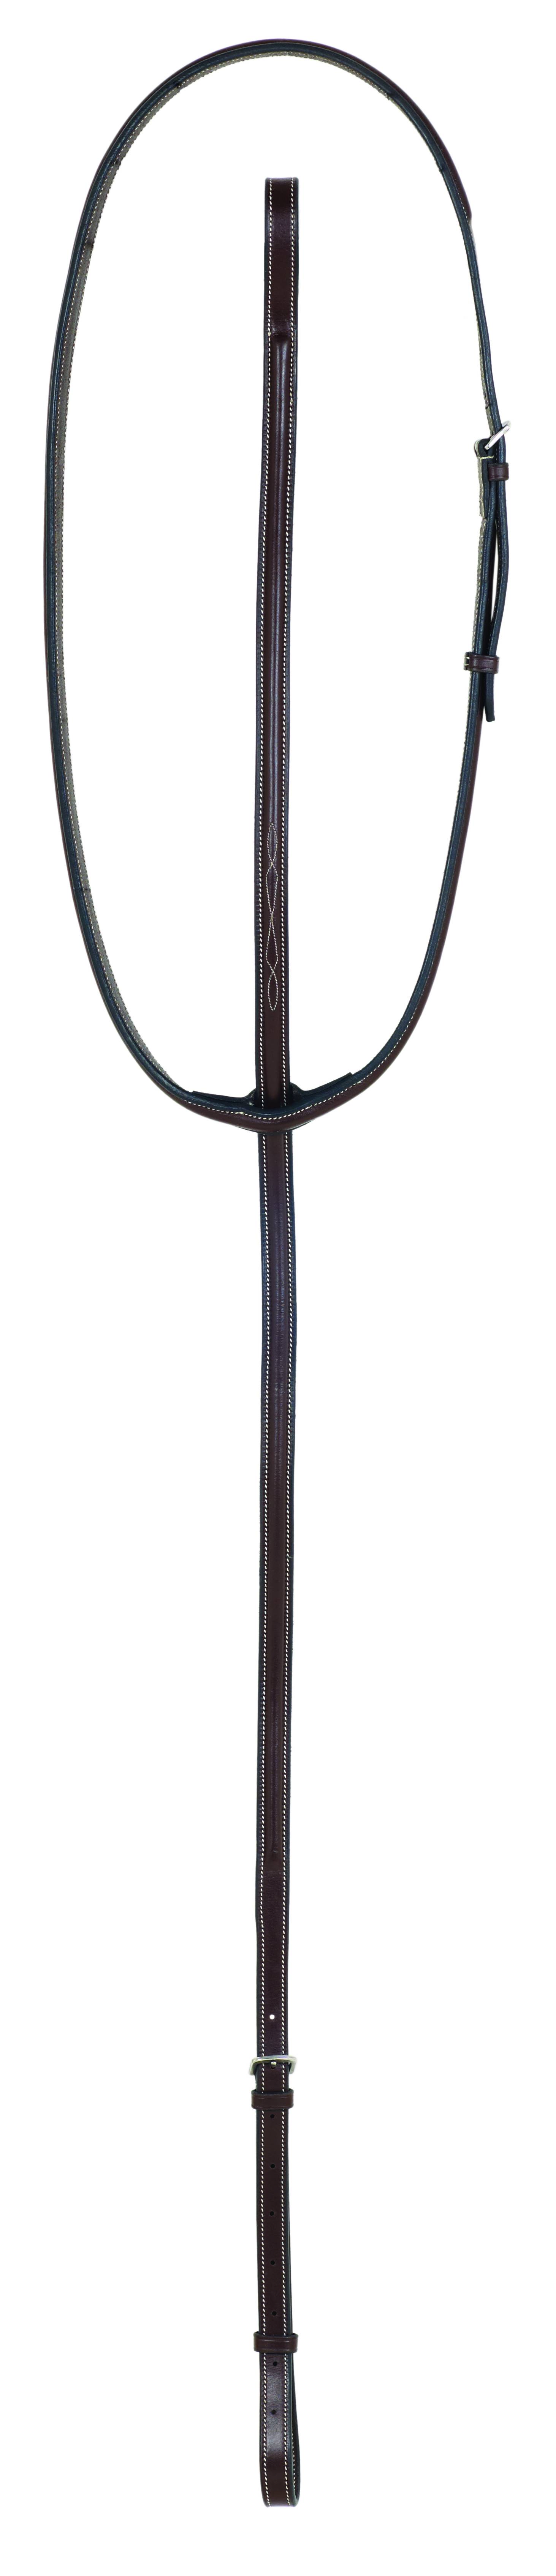 Camelot Fancy Raised Standing Martingale